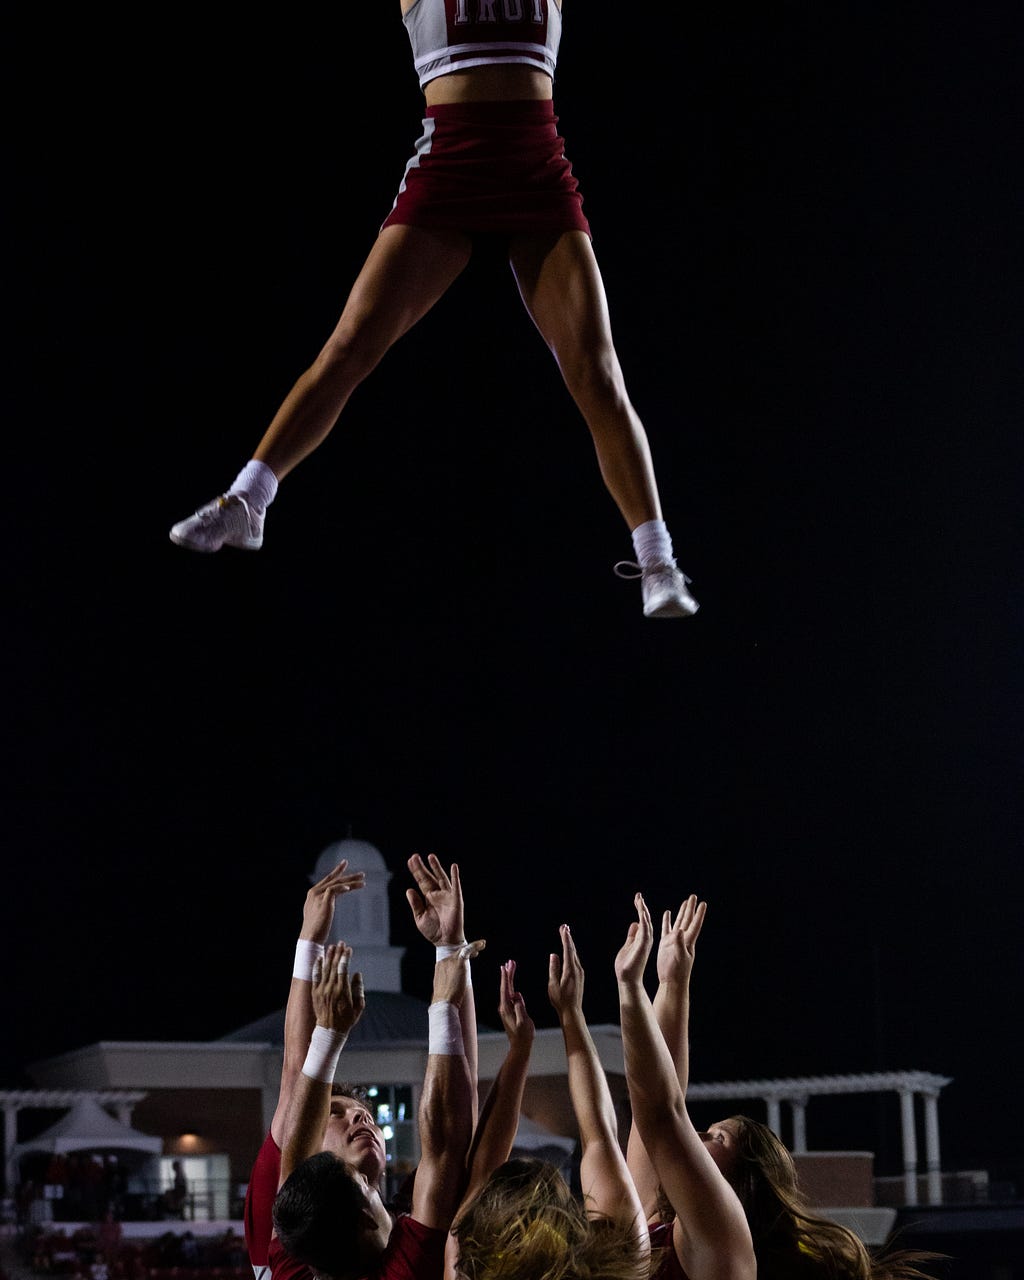 Cheerleading team tossing a member in the air